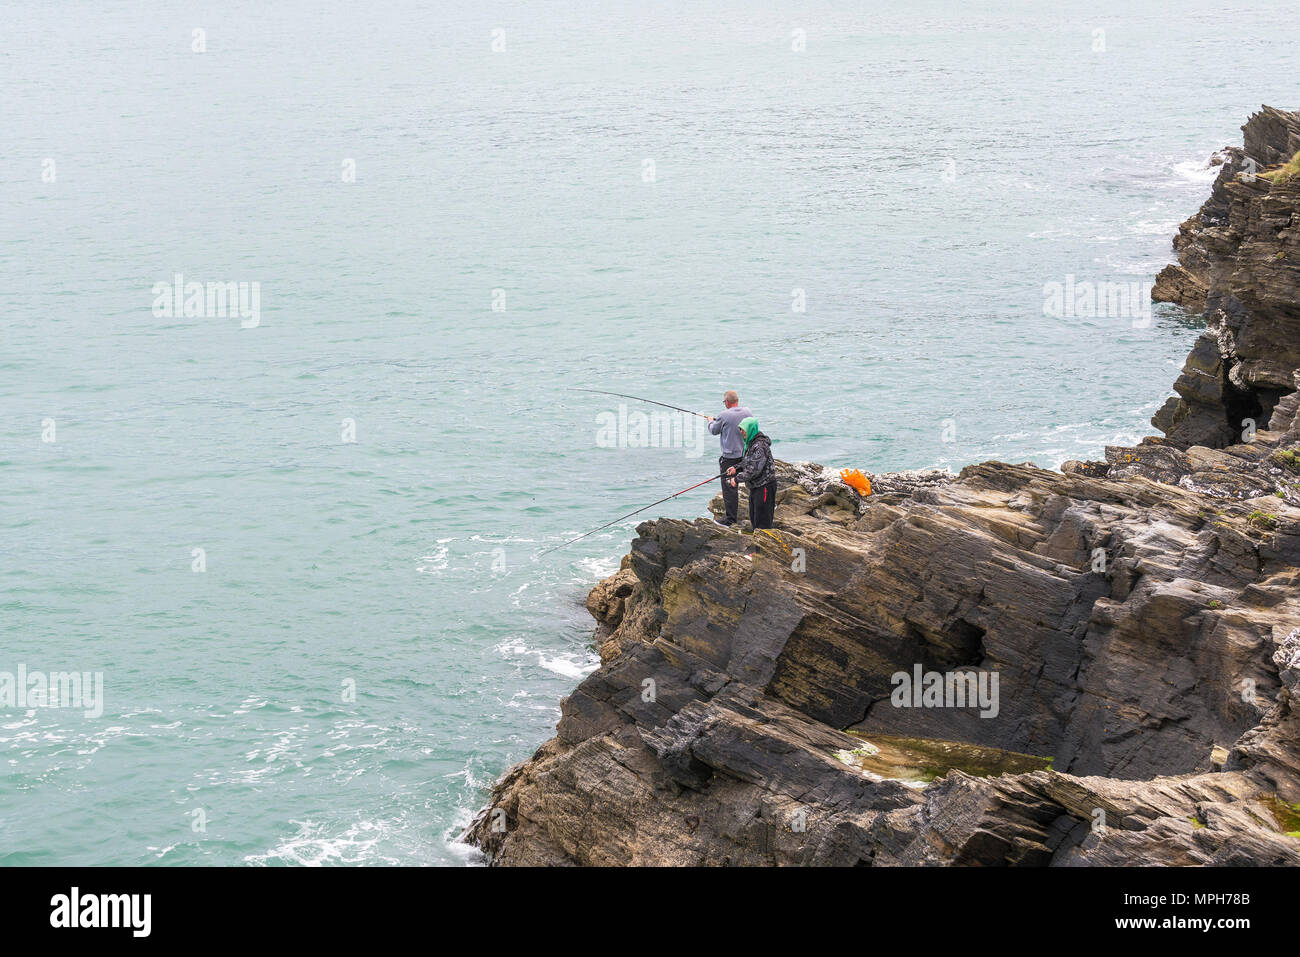 Angler Angeln vom Felsen in Newquay in Cornwall. Stockfoto